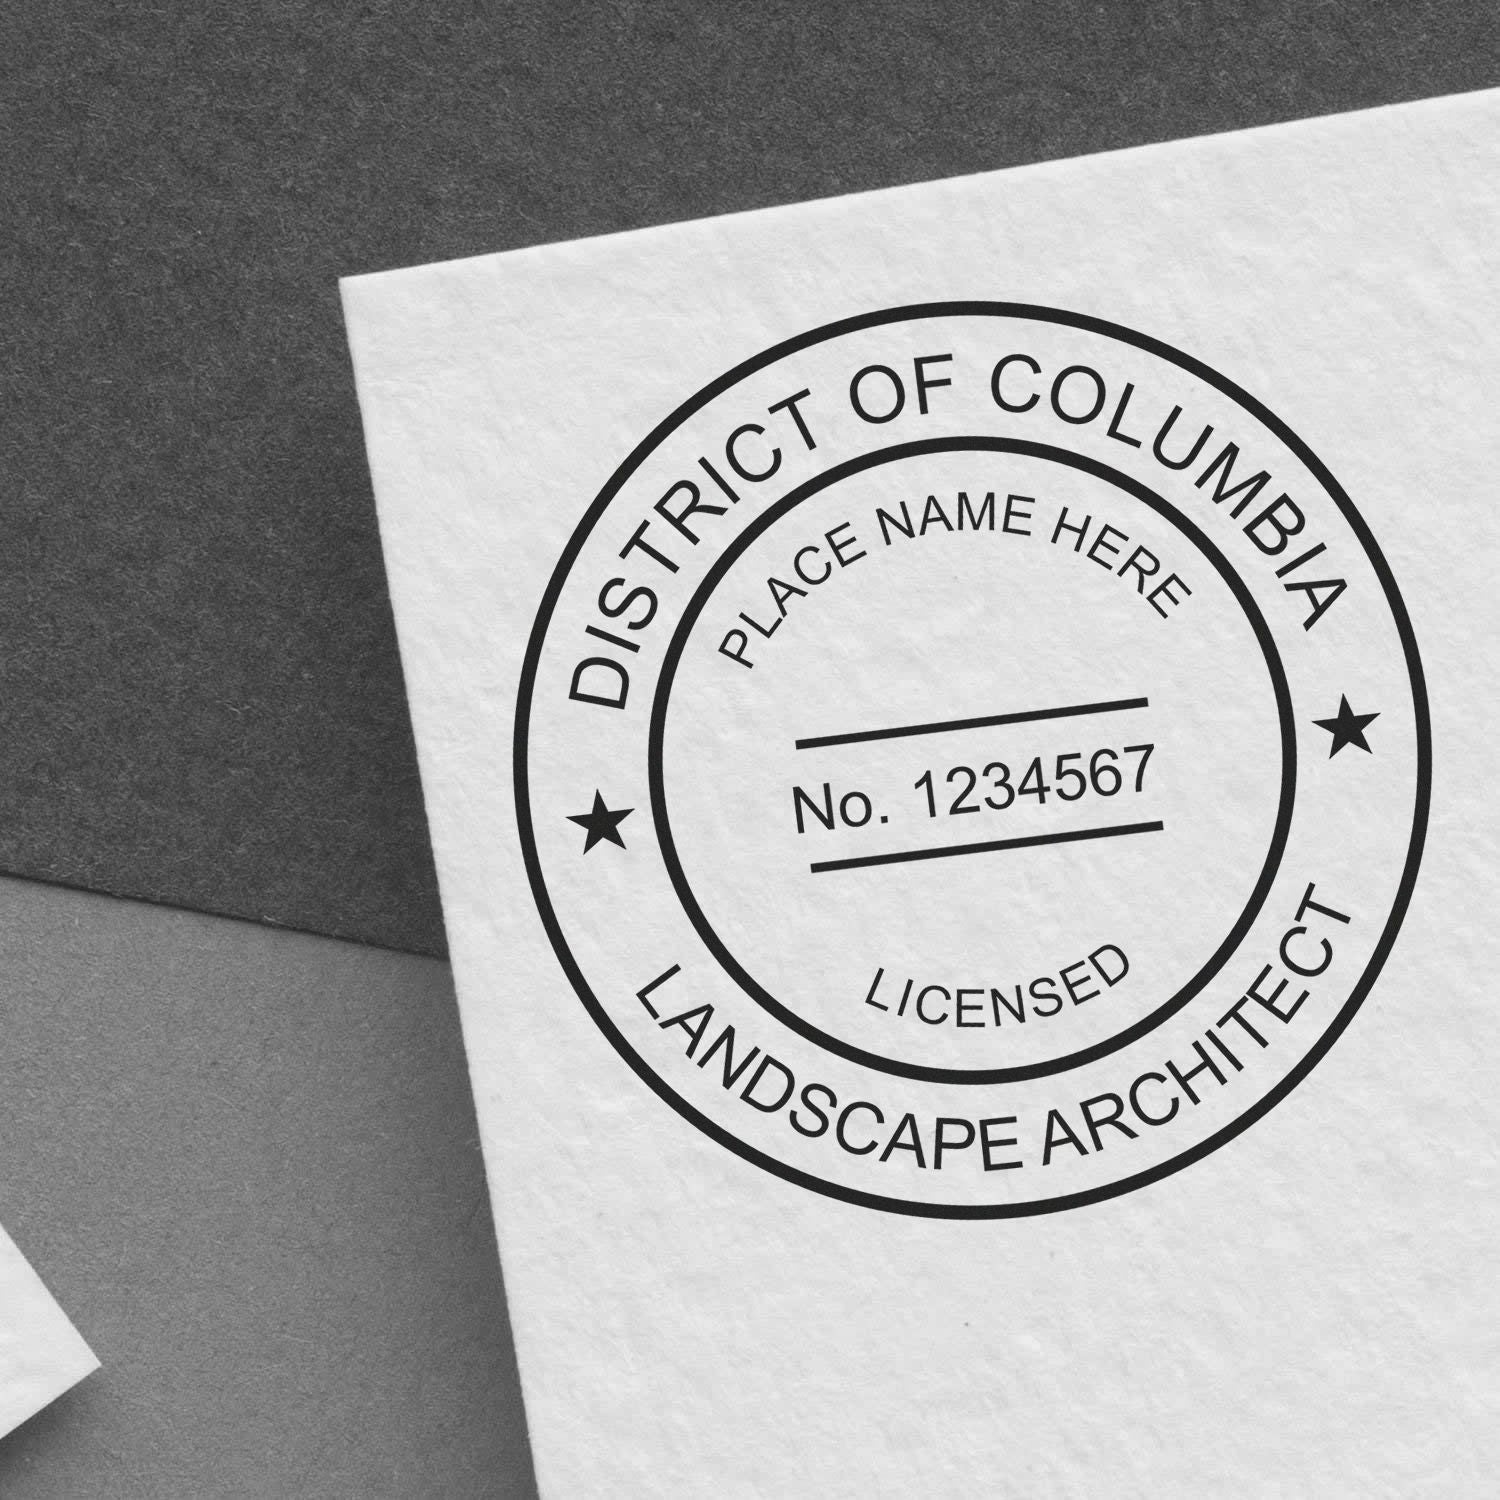 The main image for the Self-Inking District of Columbia Landscape Architect Stamp depicting a sample of the imprint and electronic files